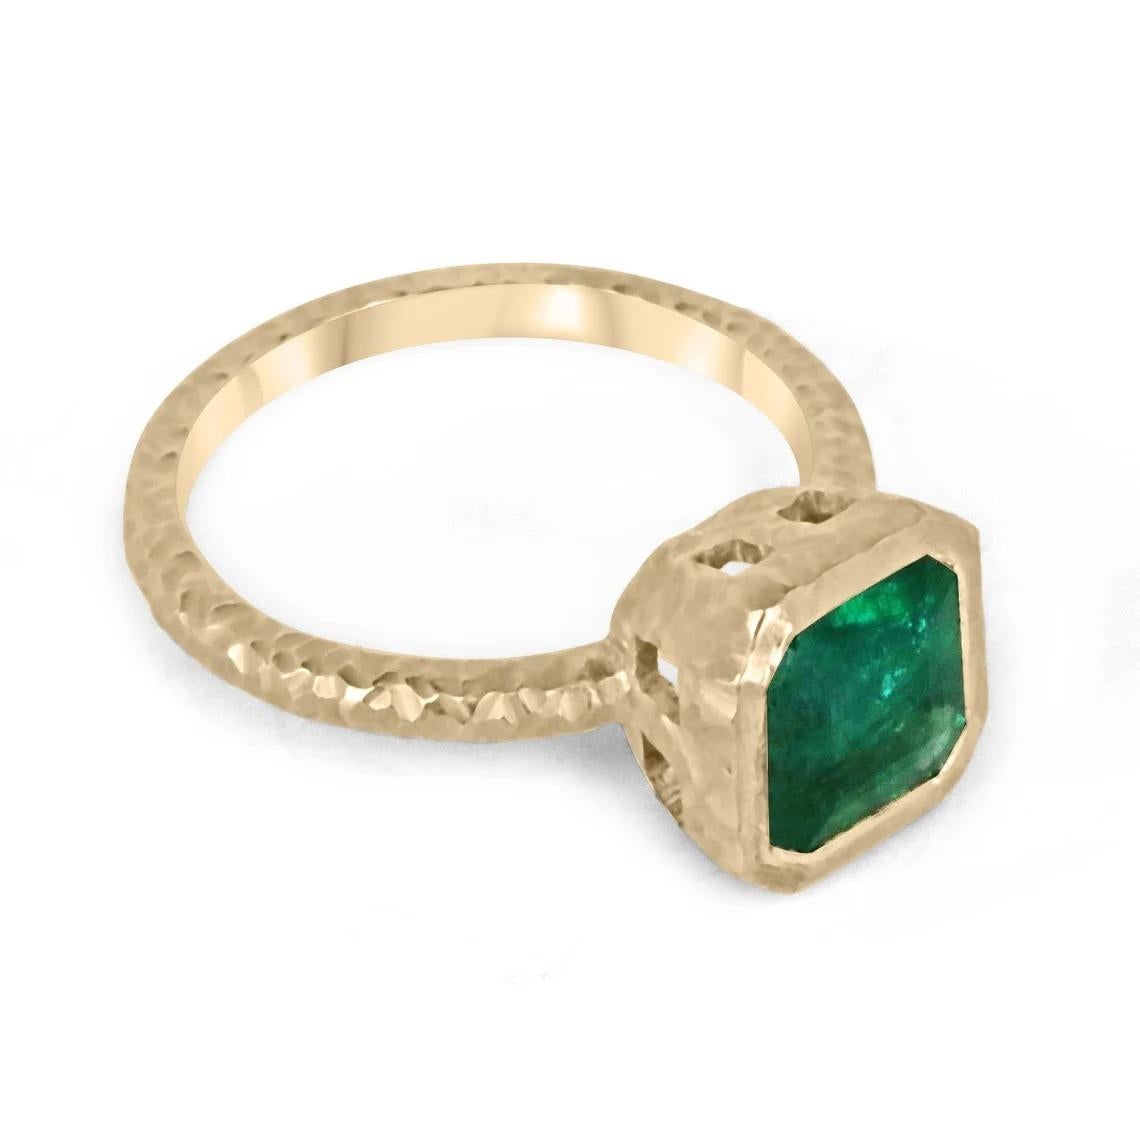 Presenting an exquisite solitaire emerald ring that exudes sophistication and uniqueness. This stunning piece showcases a magnificent 2.05 carat Asscher-cut emerald, boasting a rich, dark green color that emanates a sense of opulence. With its very